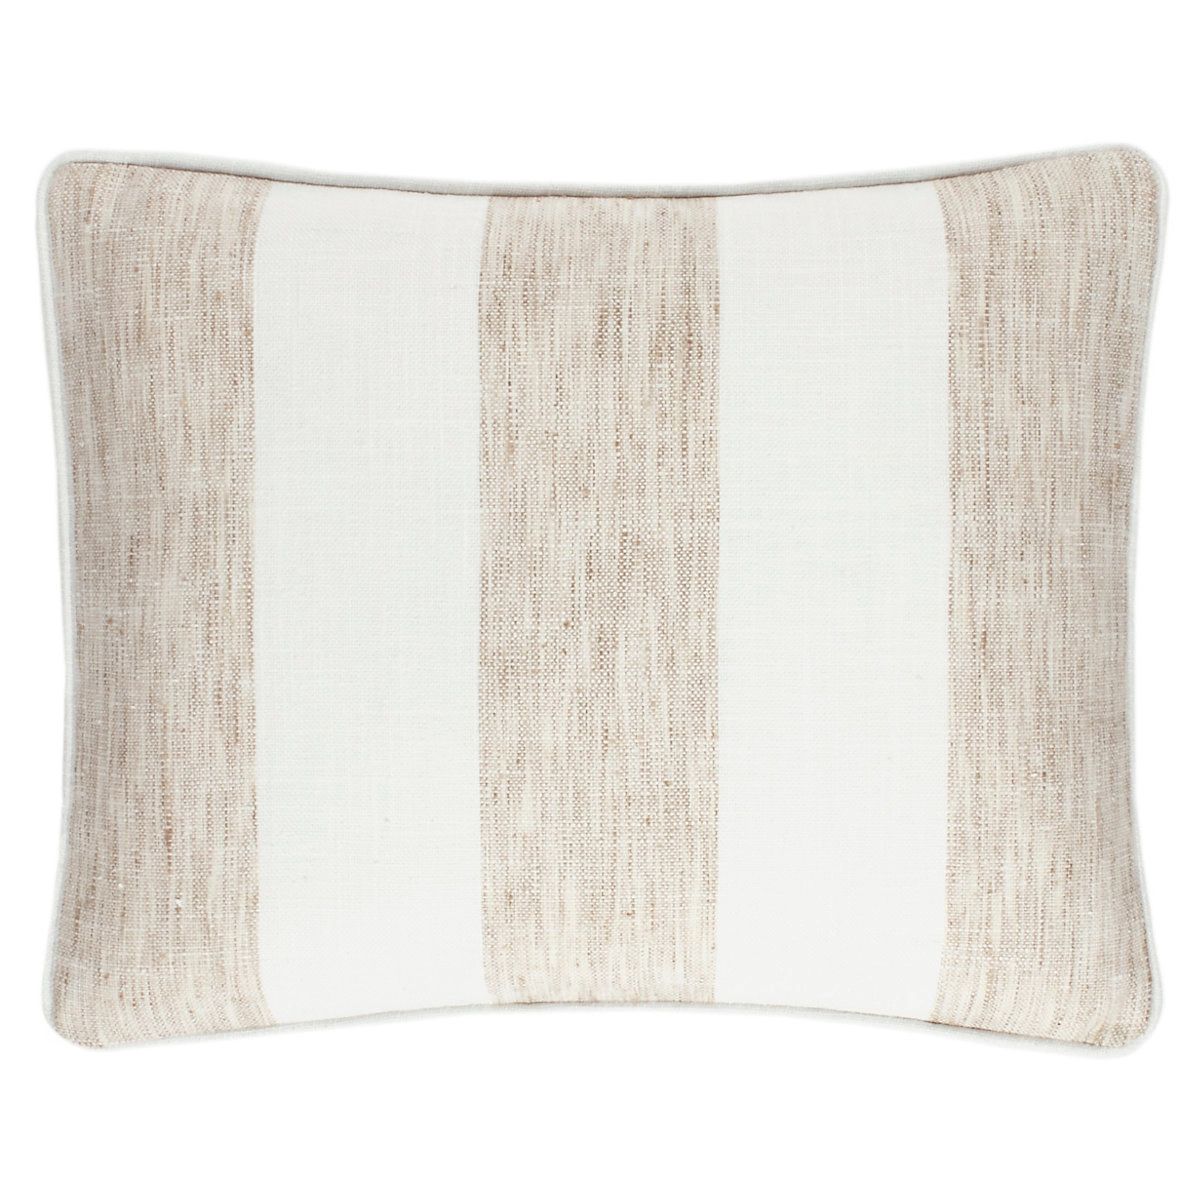 Awning Stripe Natural Indoor/Outdoor Decorative Pillow | Annie Selke